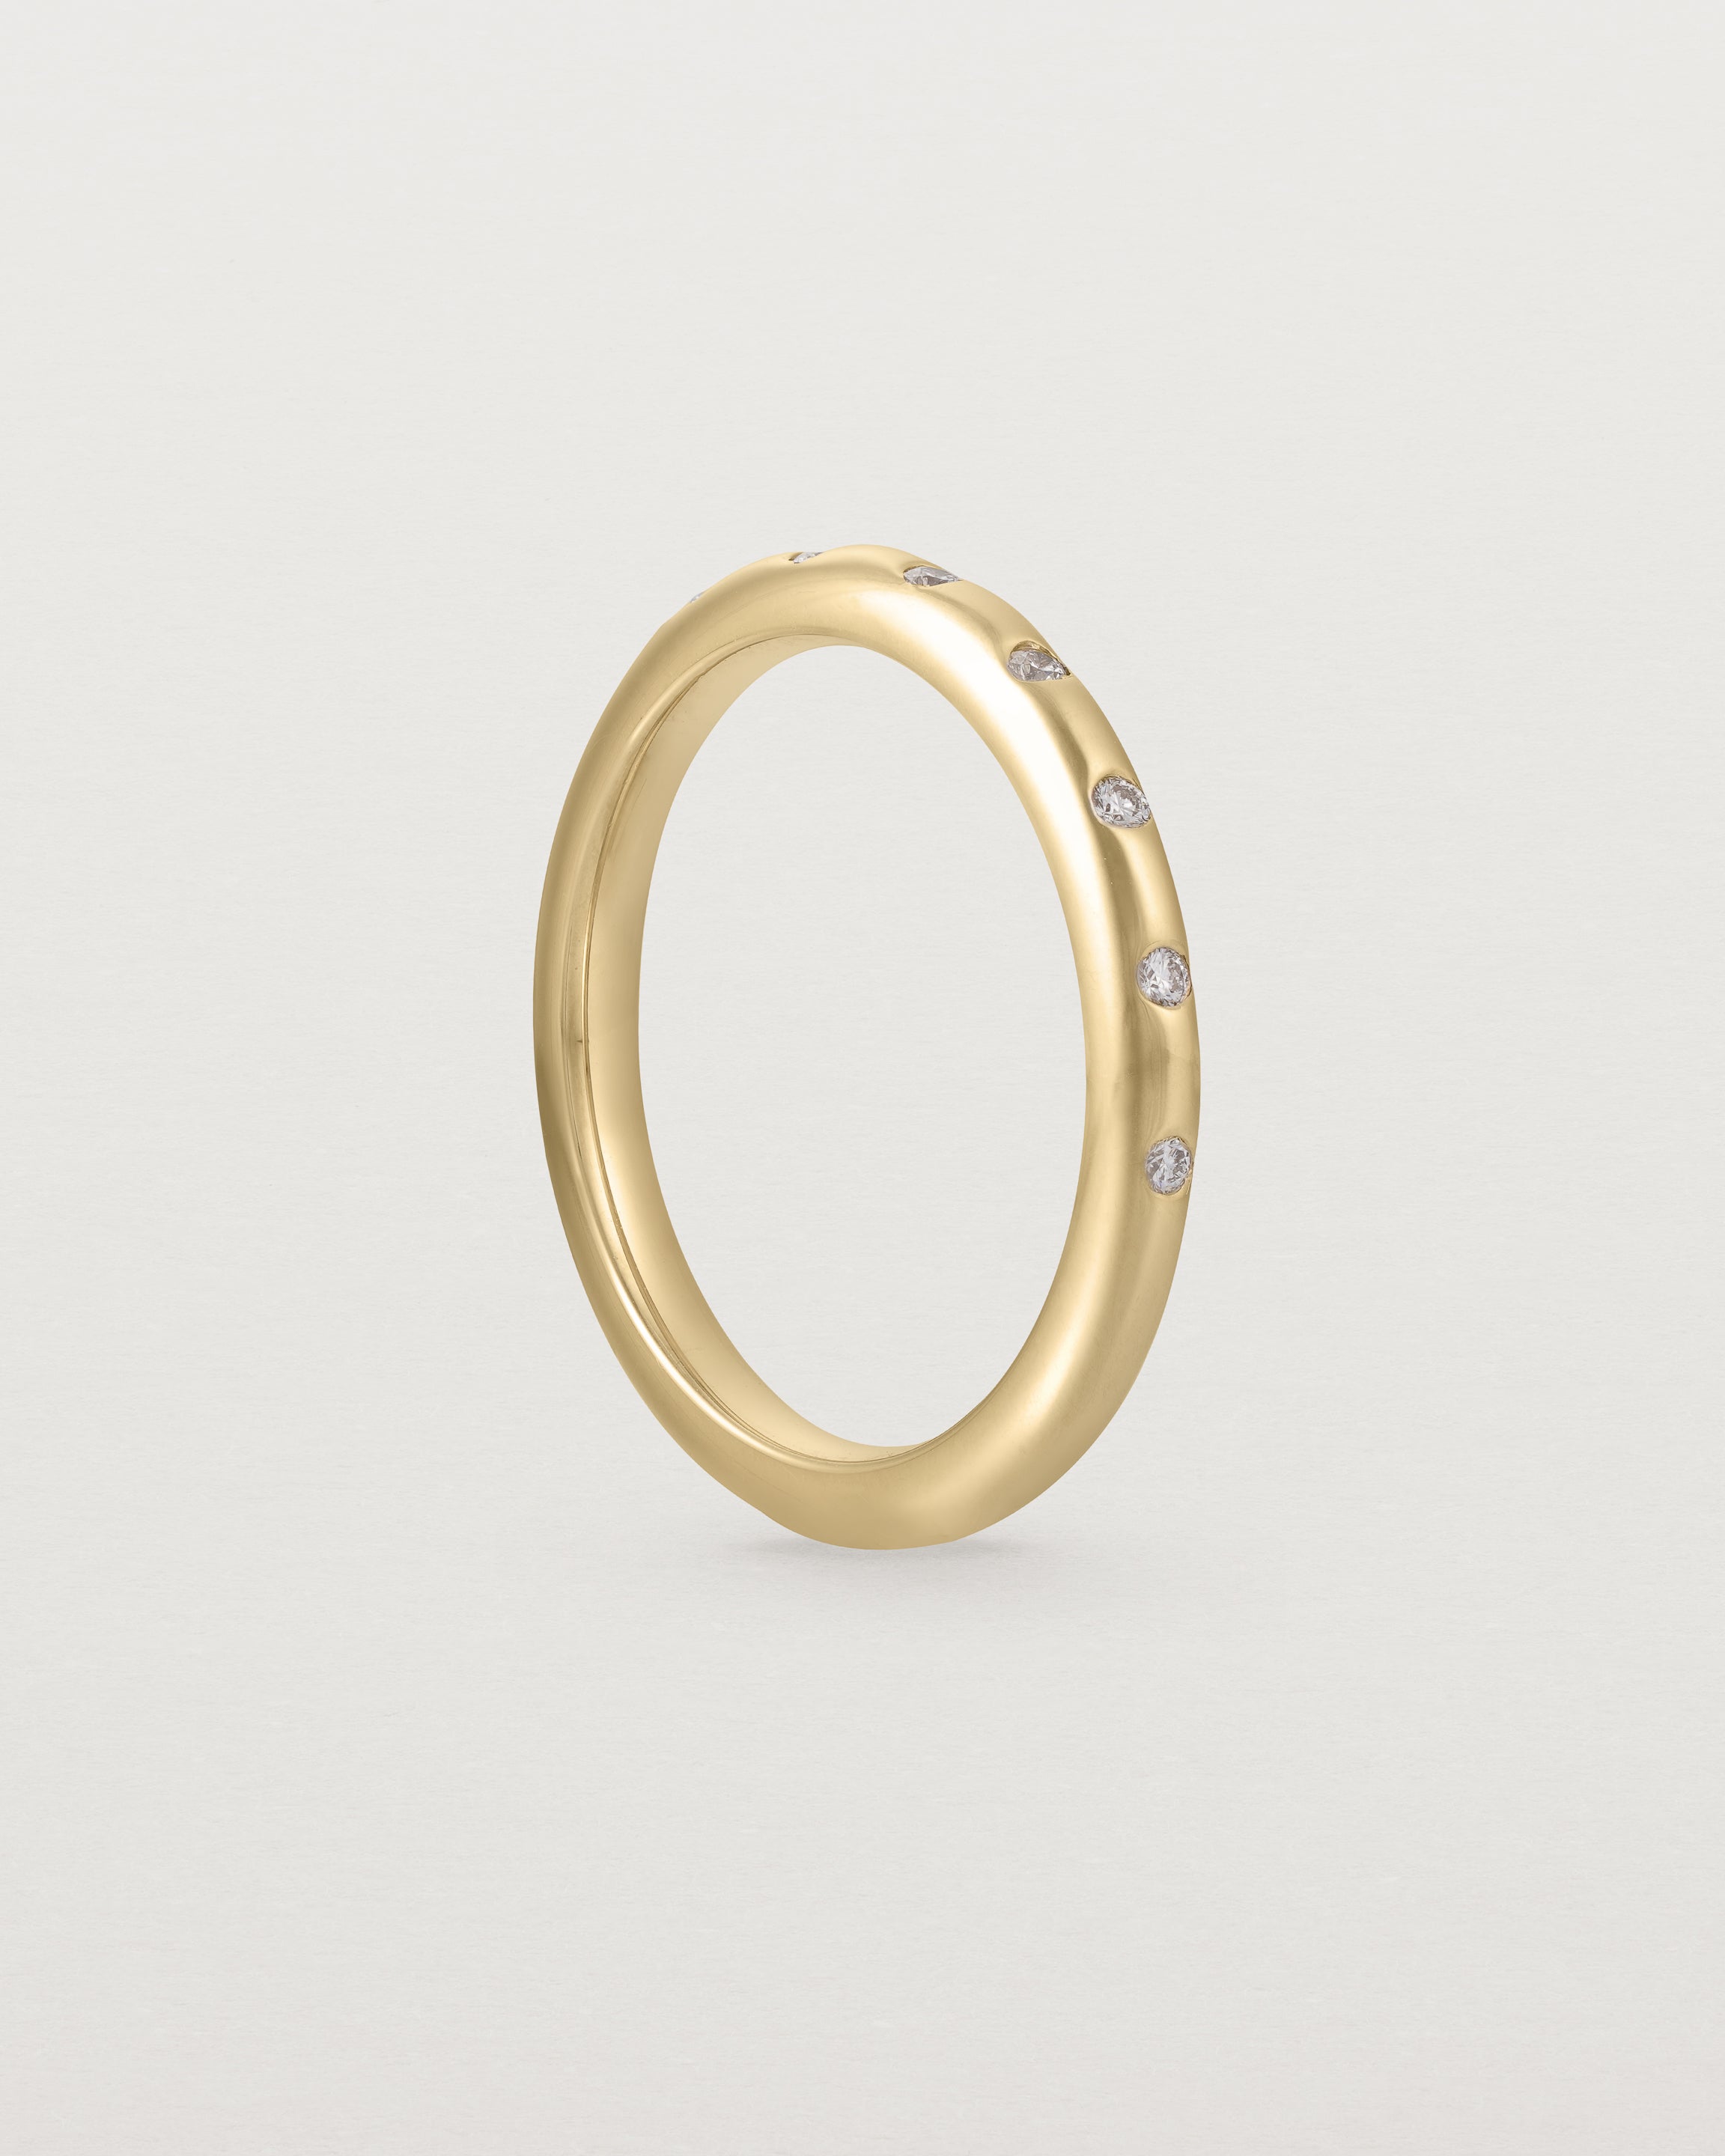 Standing view of Bold Curve Ring | 2mm | Diamonds | Yellow Gold.